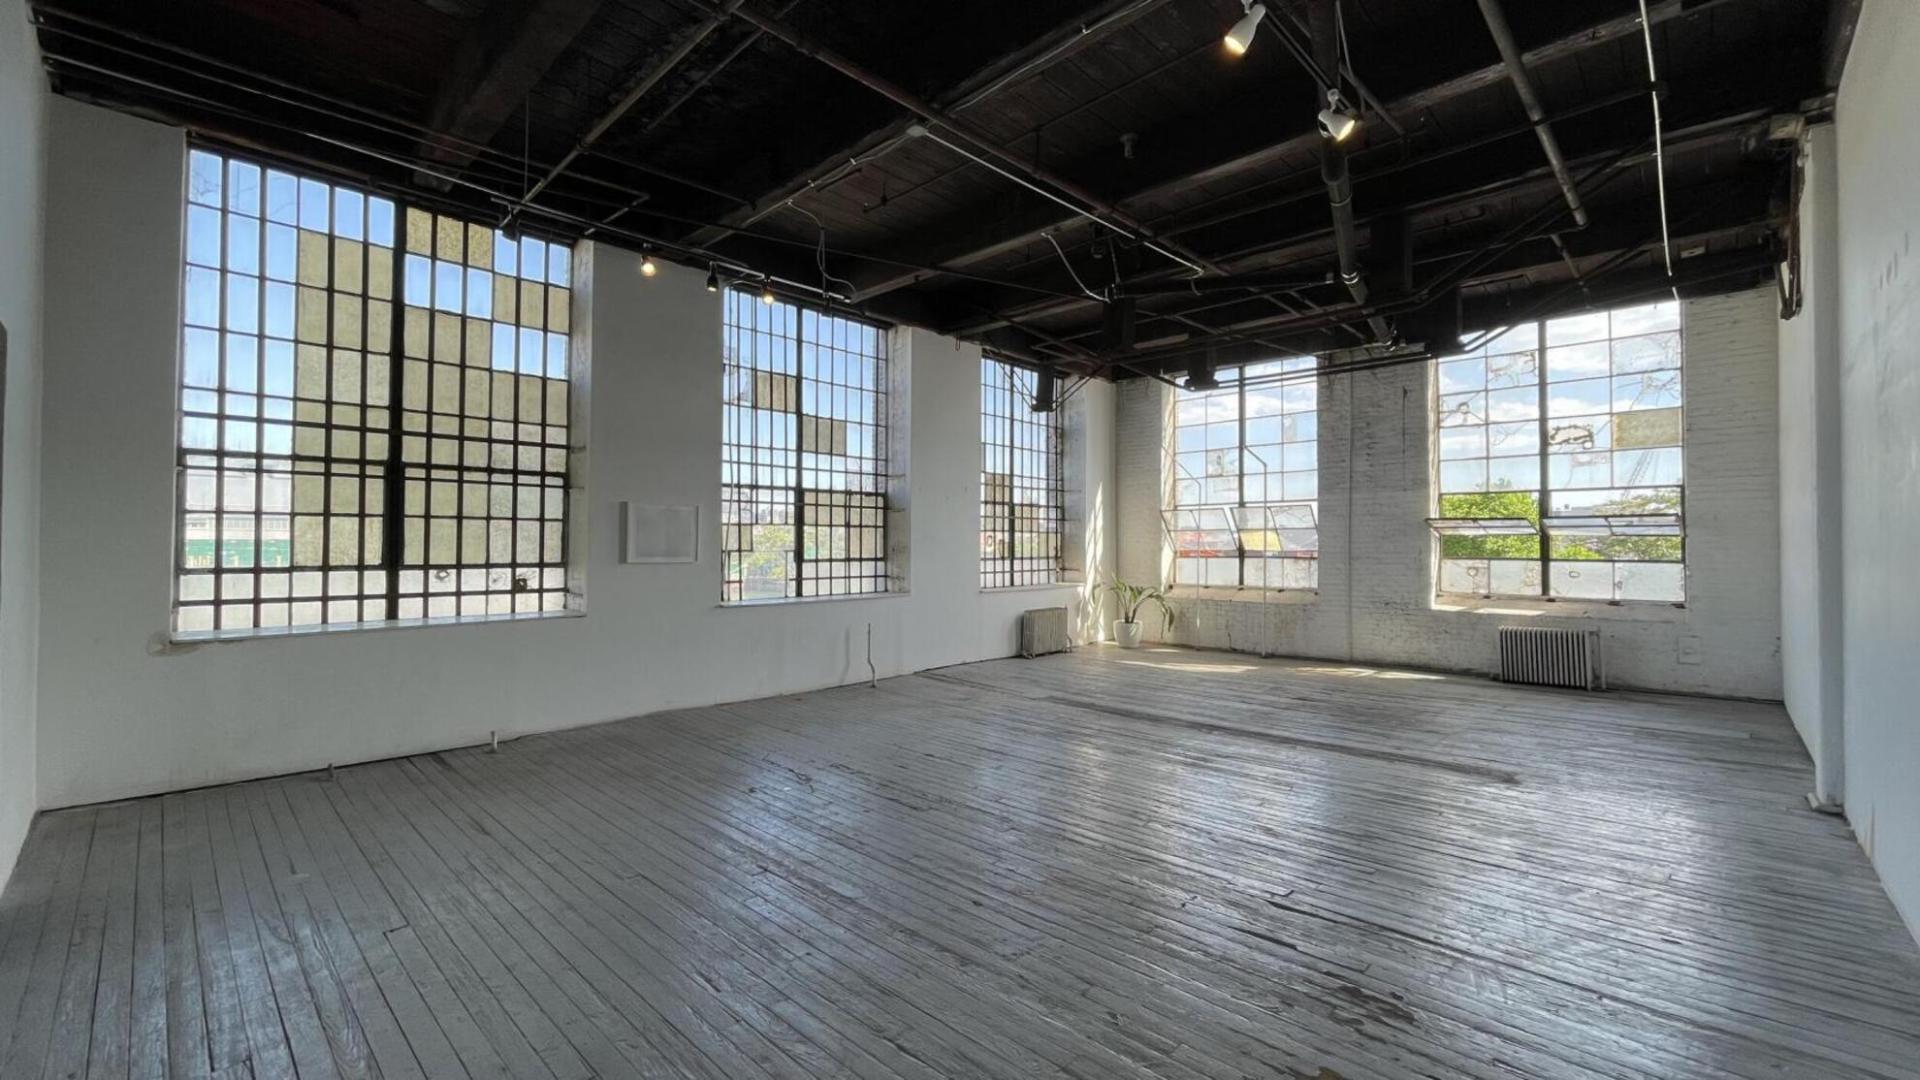 Warehouse Venues for Rent in New York City, NY